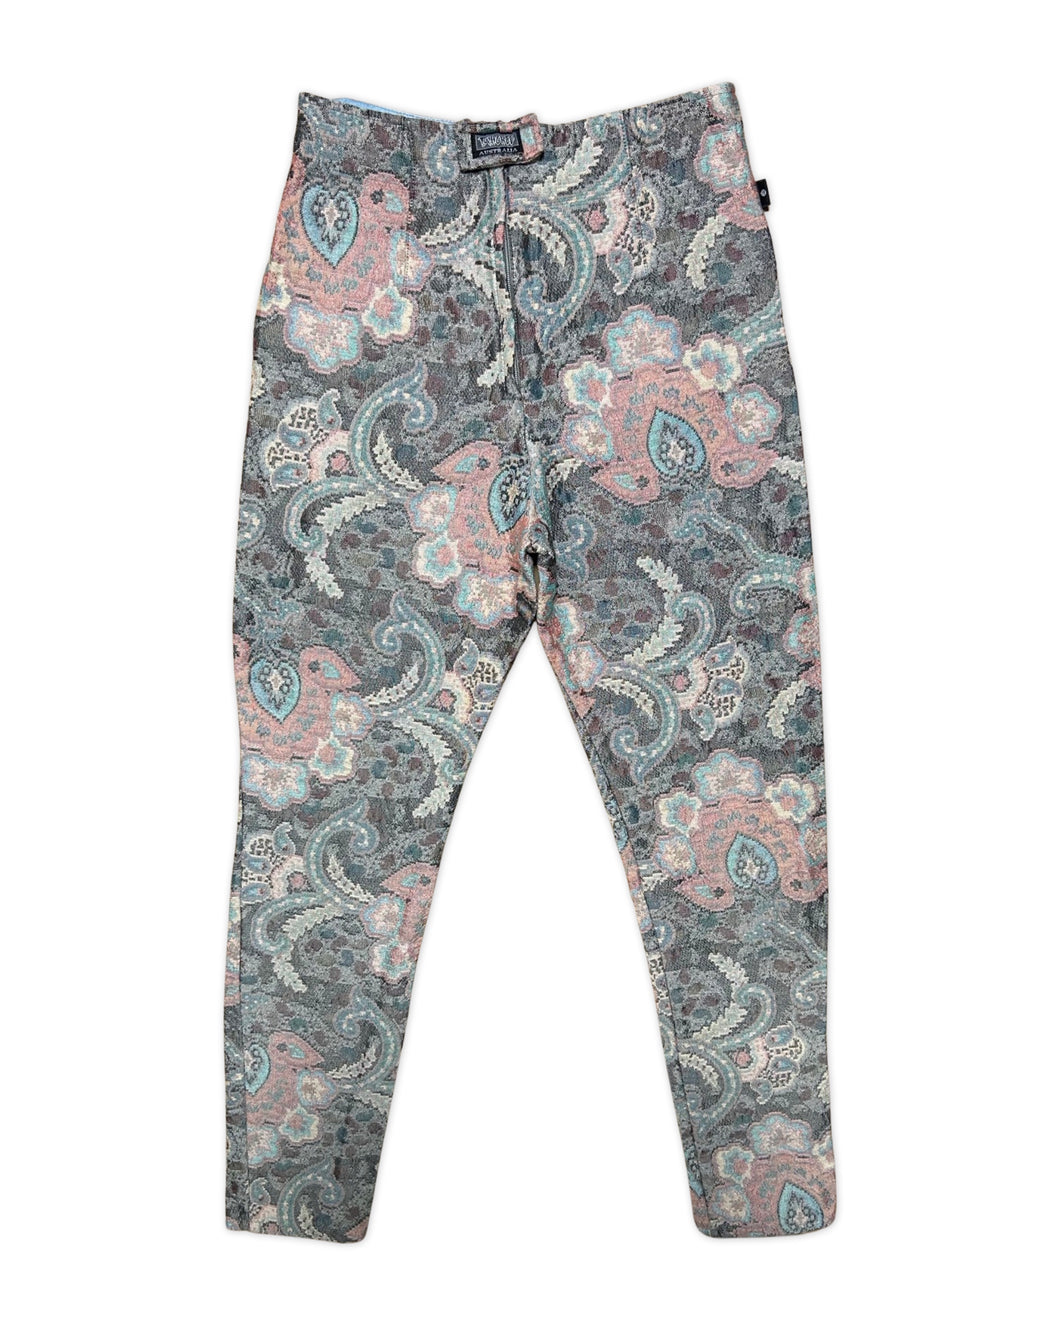 Tahchee ⏐Vintage Tapestry Woven Womens Pants <br />Size M